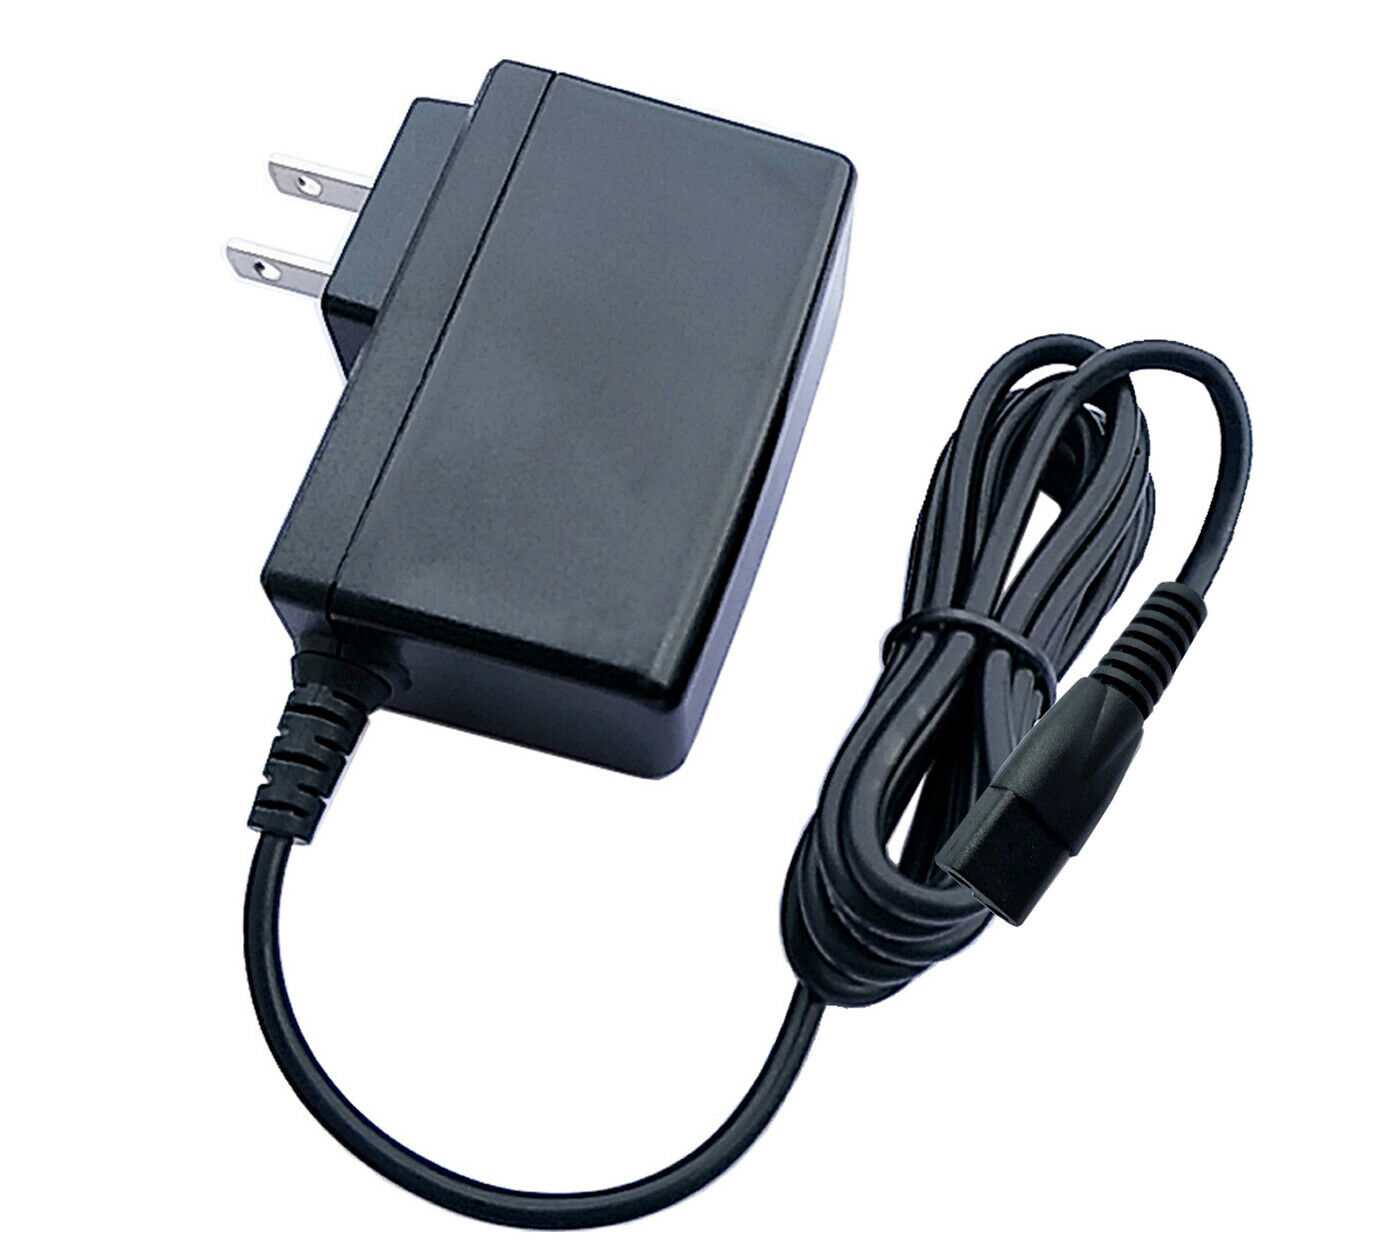 AC/DC Adapter For Icom IC-2SAT IC-3SAT IC-24AT IC-A23 Radio Power Supply Charger Technical Specifications: 1 AC input vo